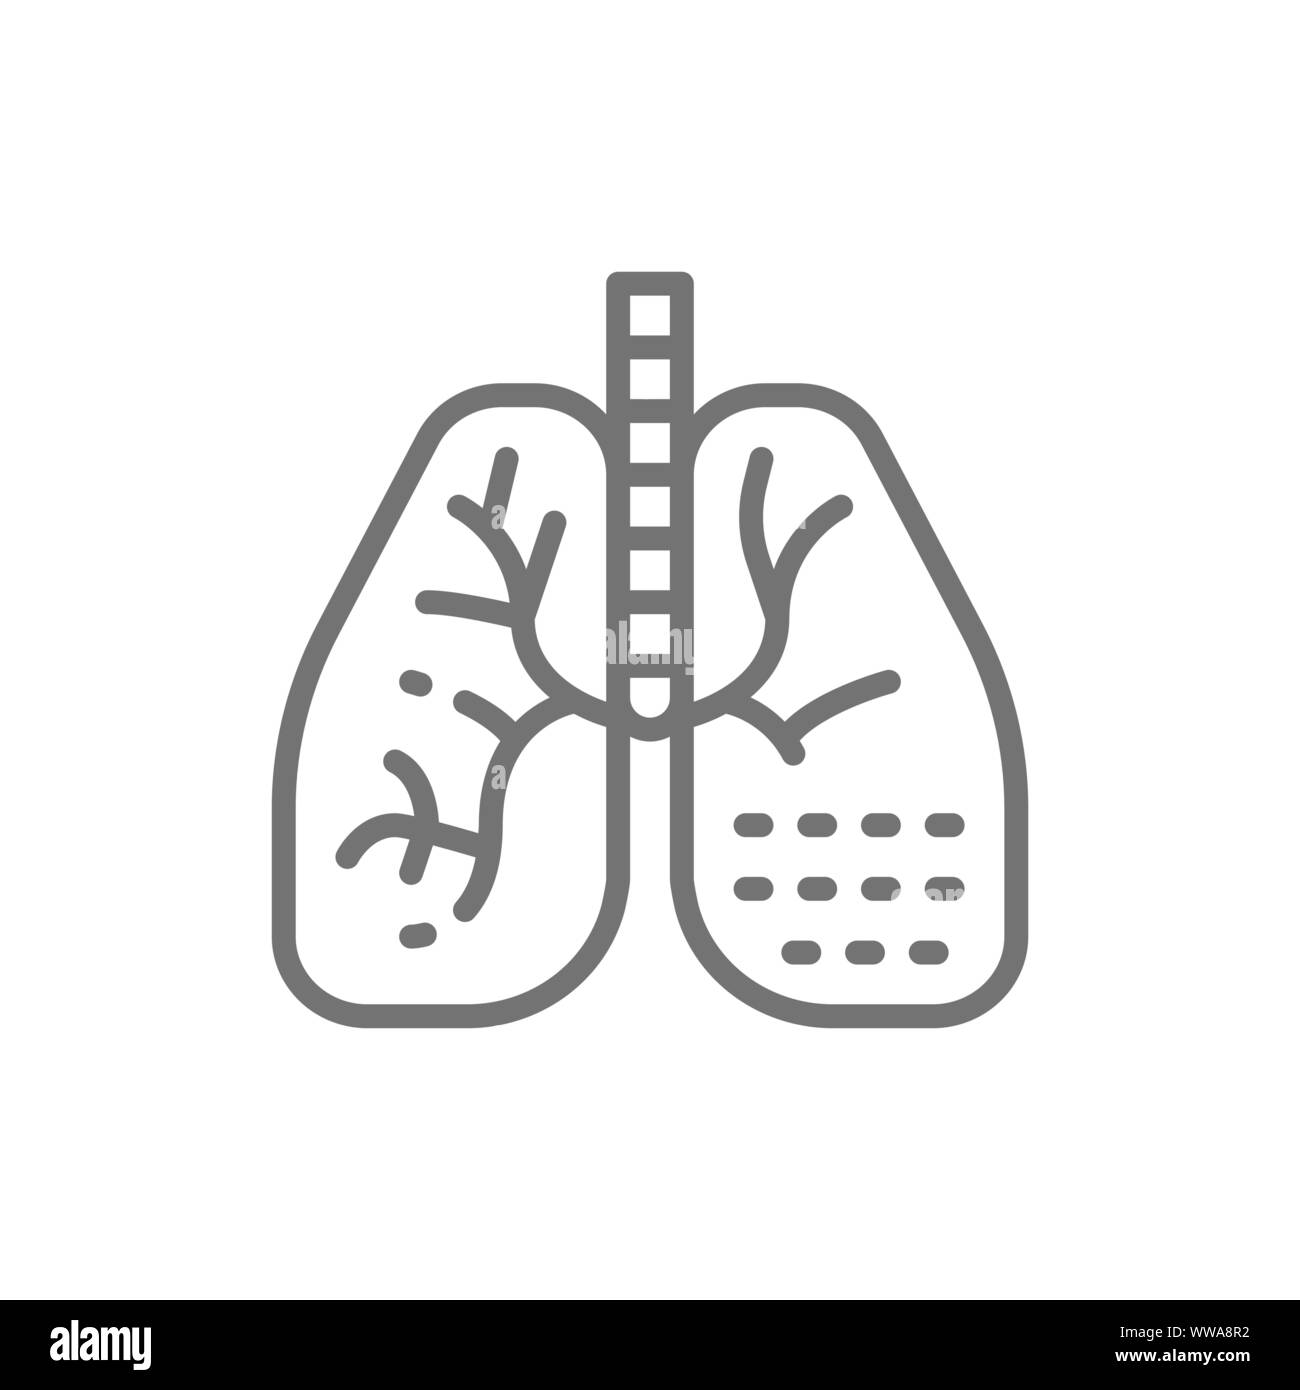 Lung disease line icon. Isolated on white background Stock Vector